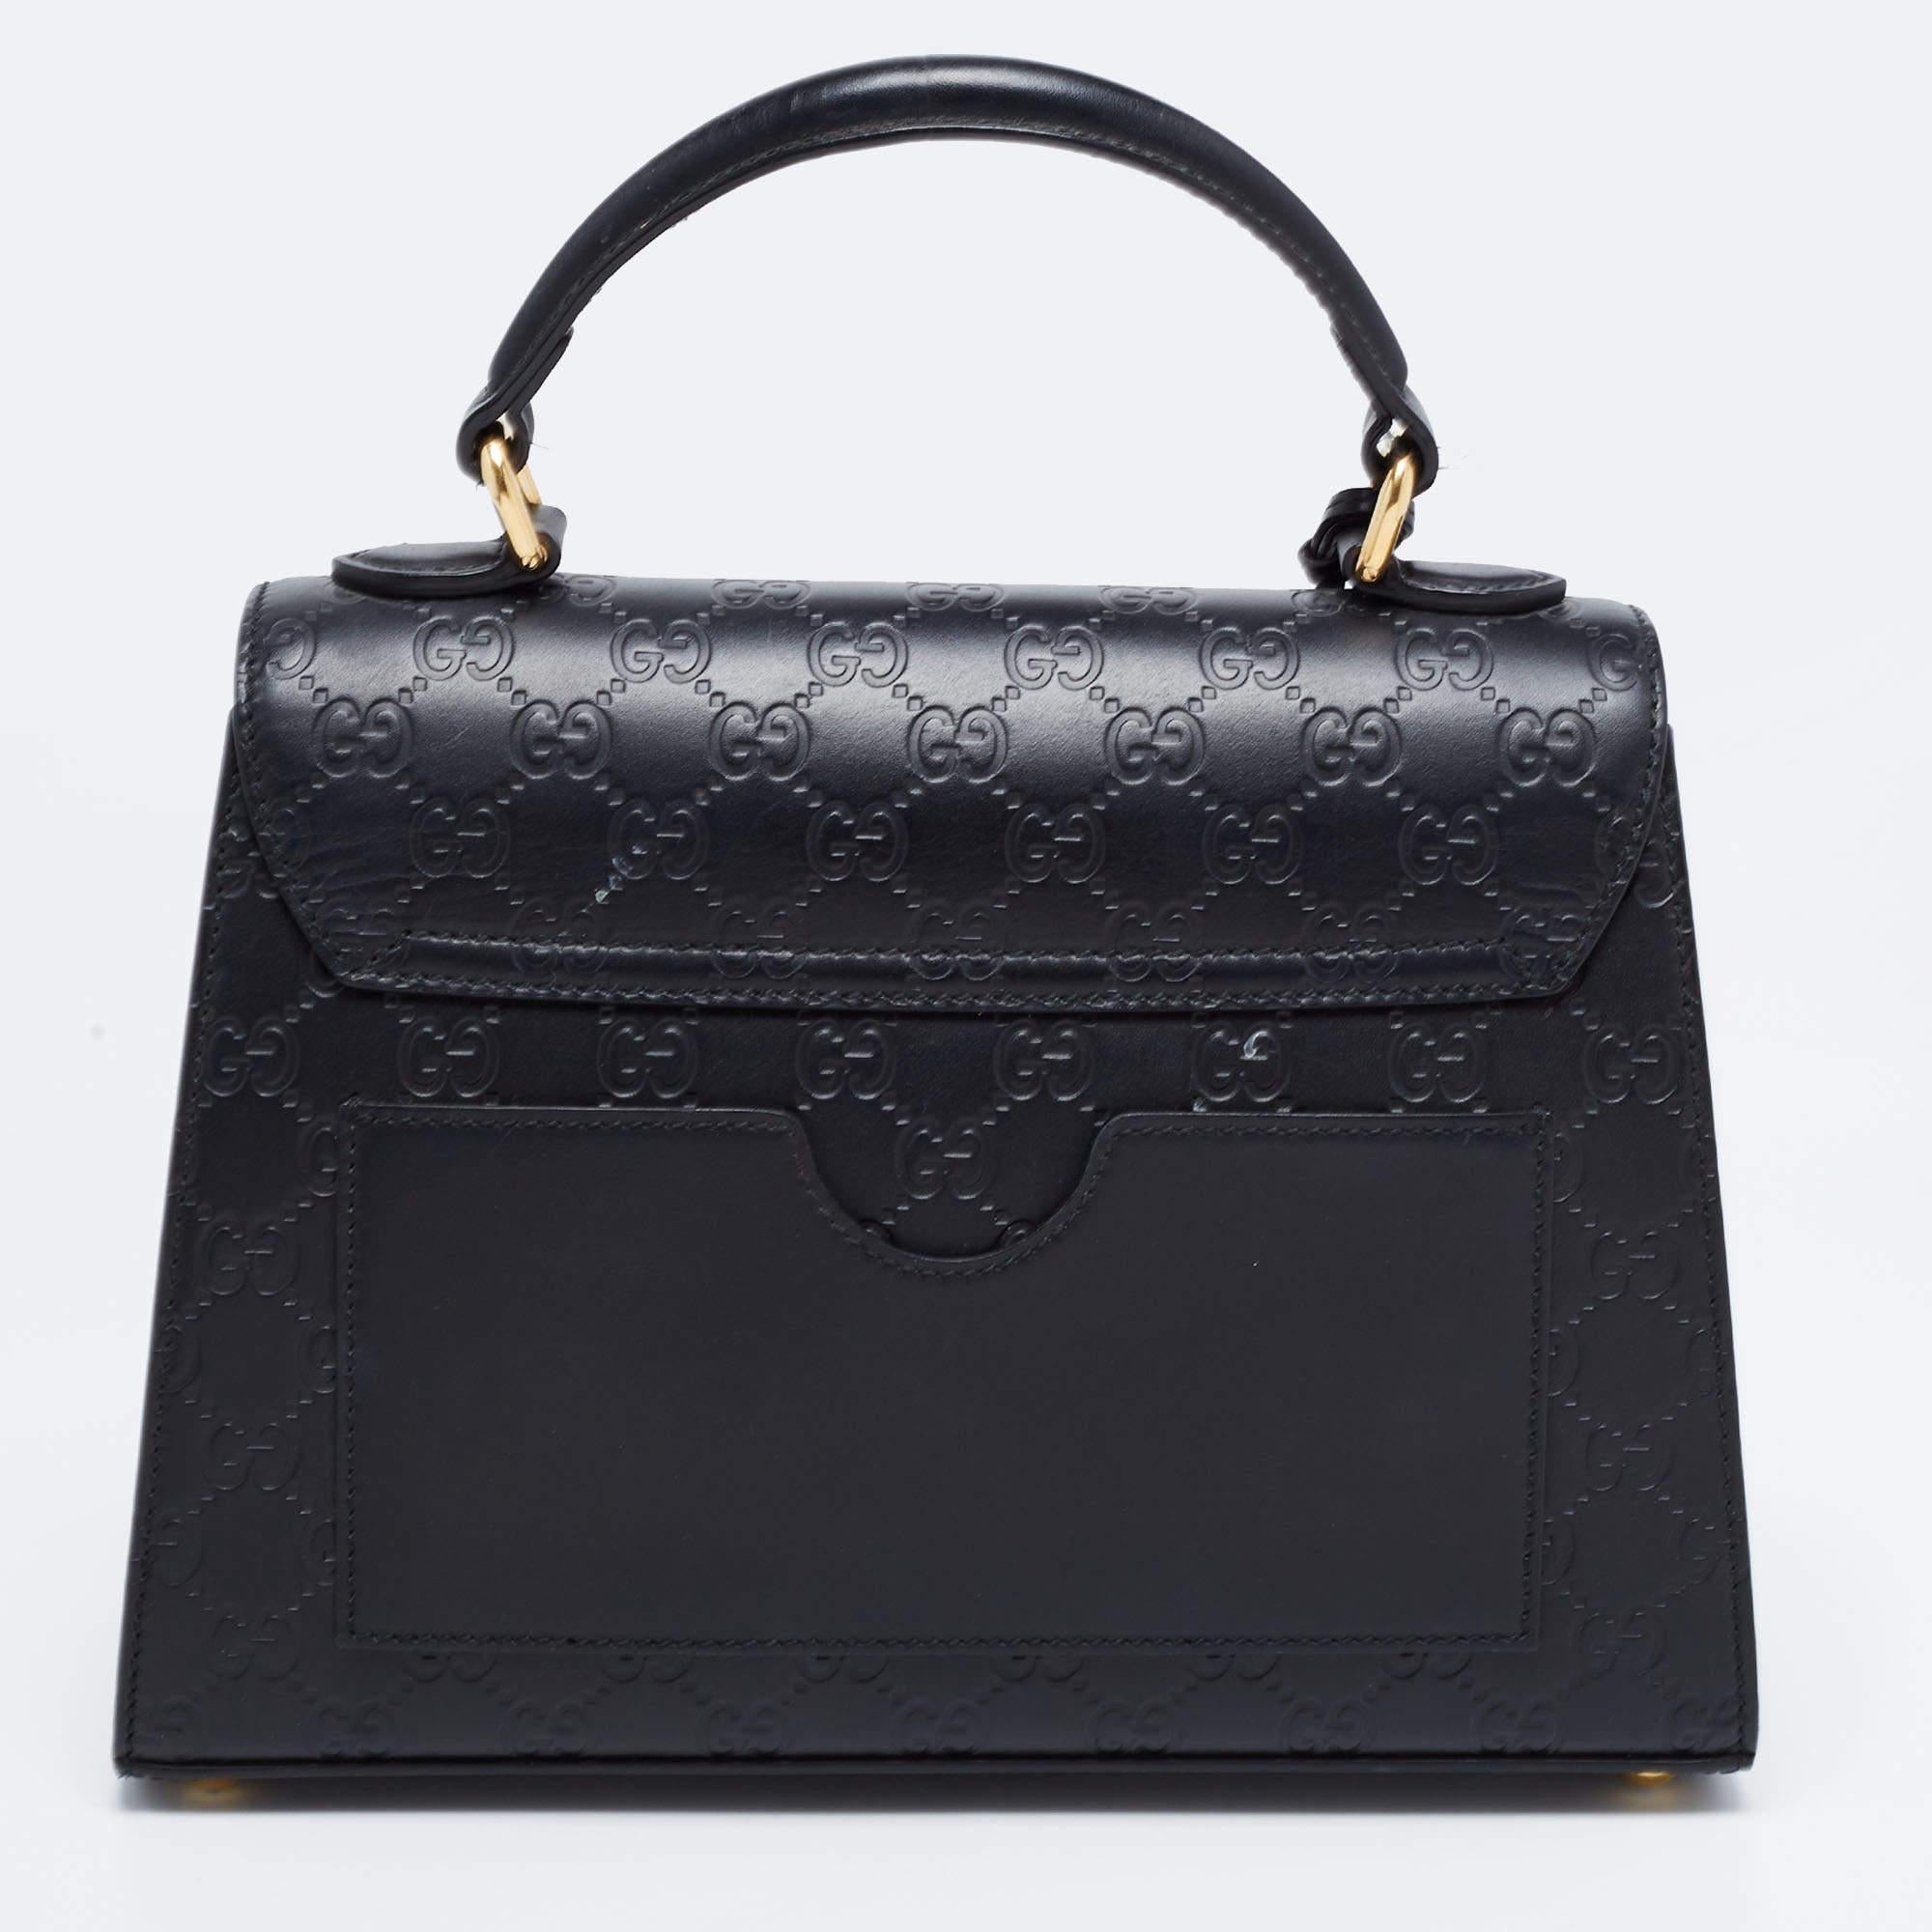 A chic bag for you to step out in style and win compliments! This bag from Gucci comes crafted from the choicest material and features a top handle and a spacious interior that can easily store your daily essentials. The bag exudes an aura of